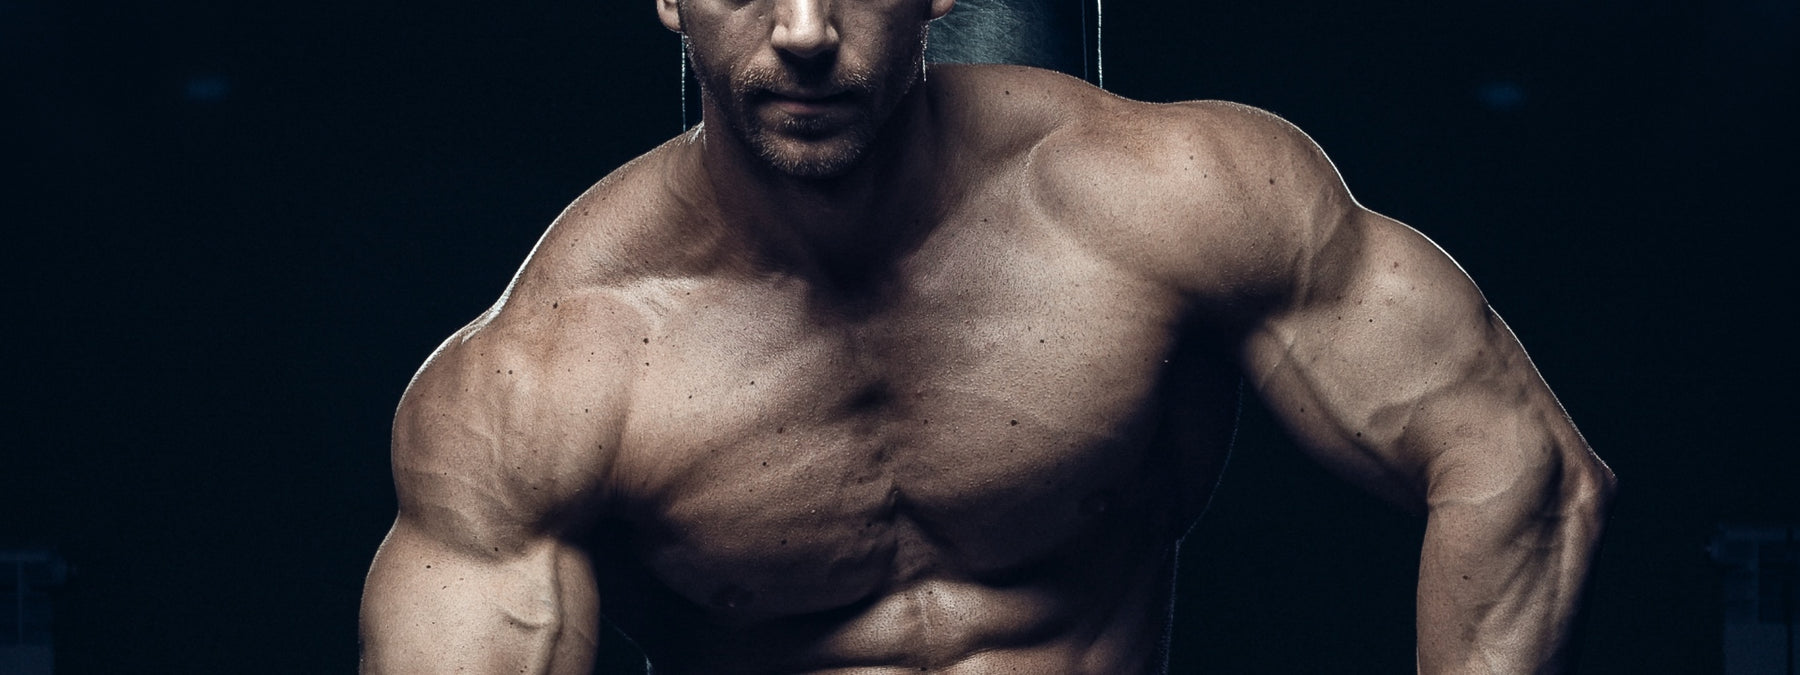 2 Muscle Building Workouts: Building the X-Frame Physique